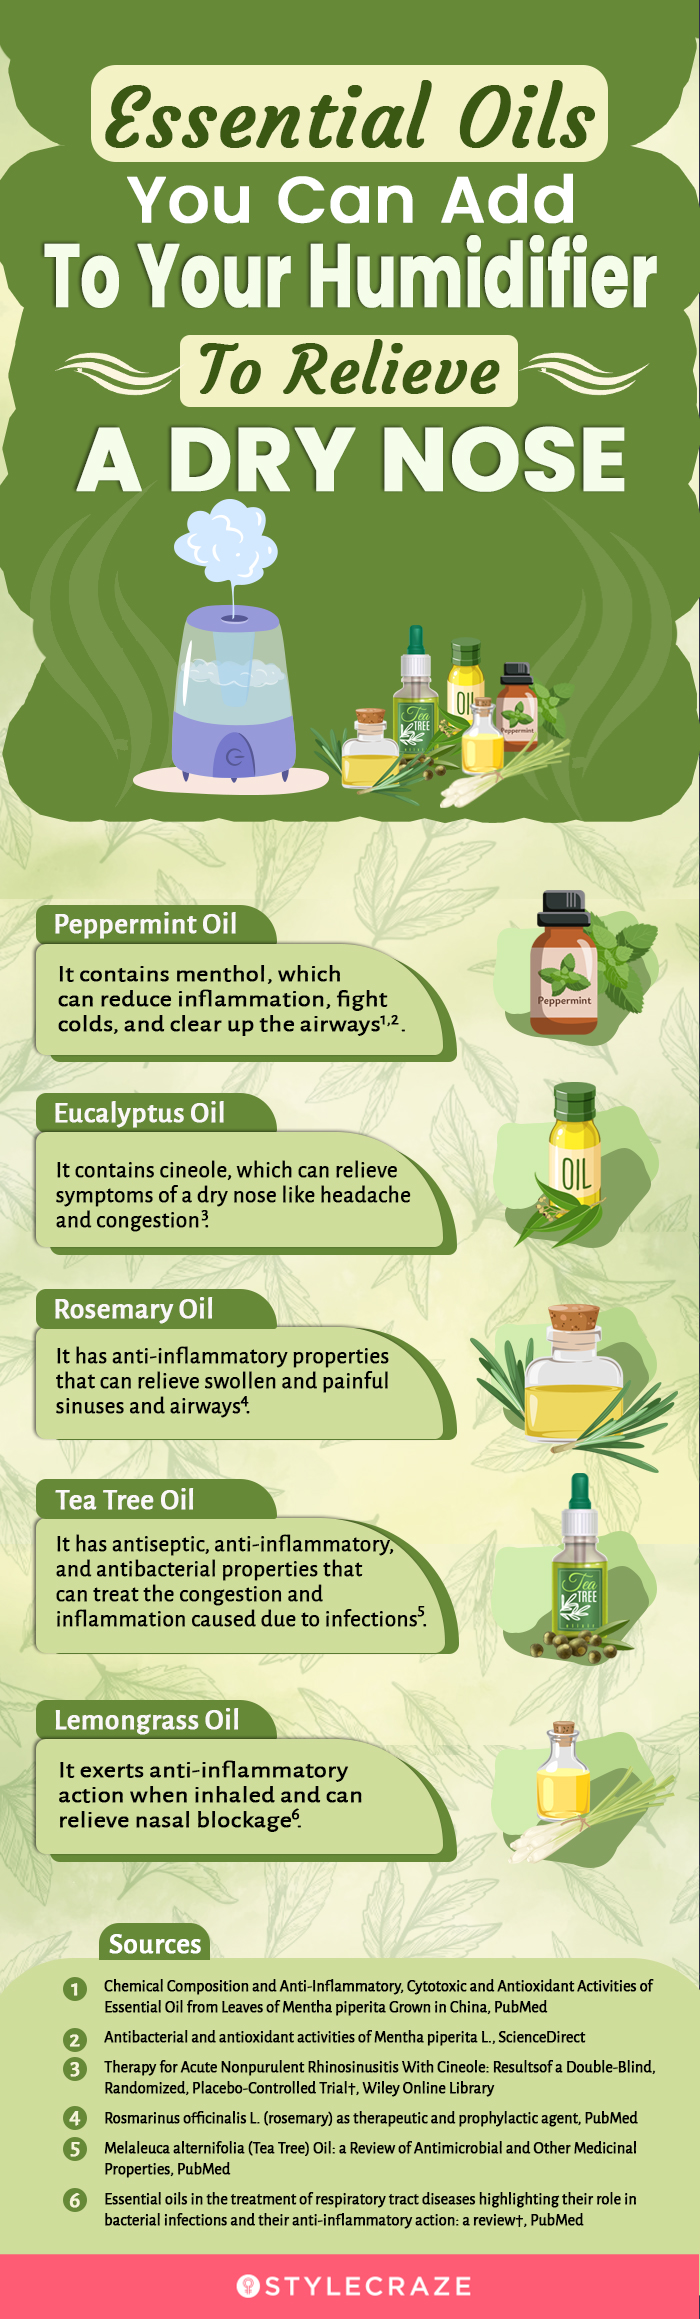 essential oils you can add to your humidifier to relieve a dry nose (infographic)